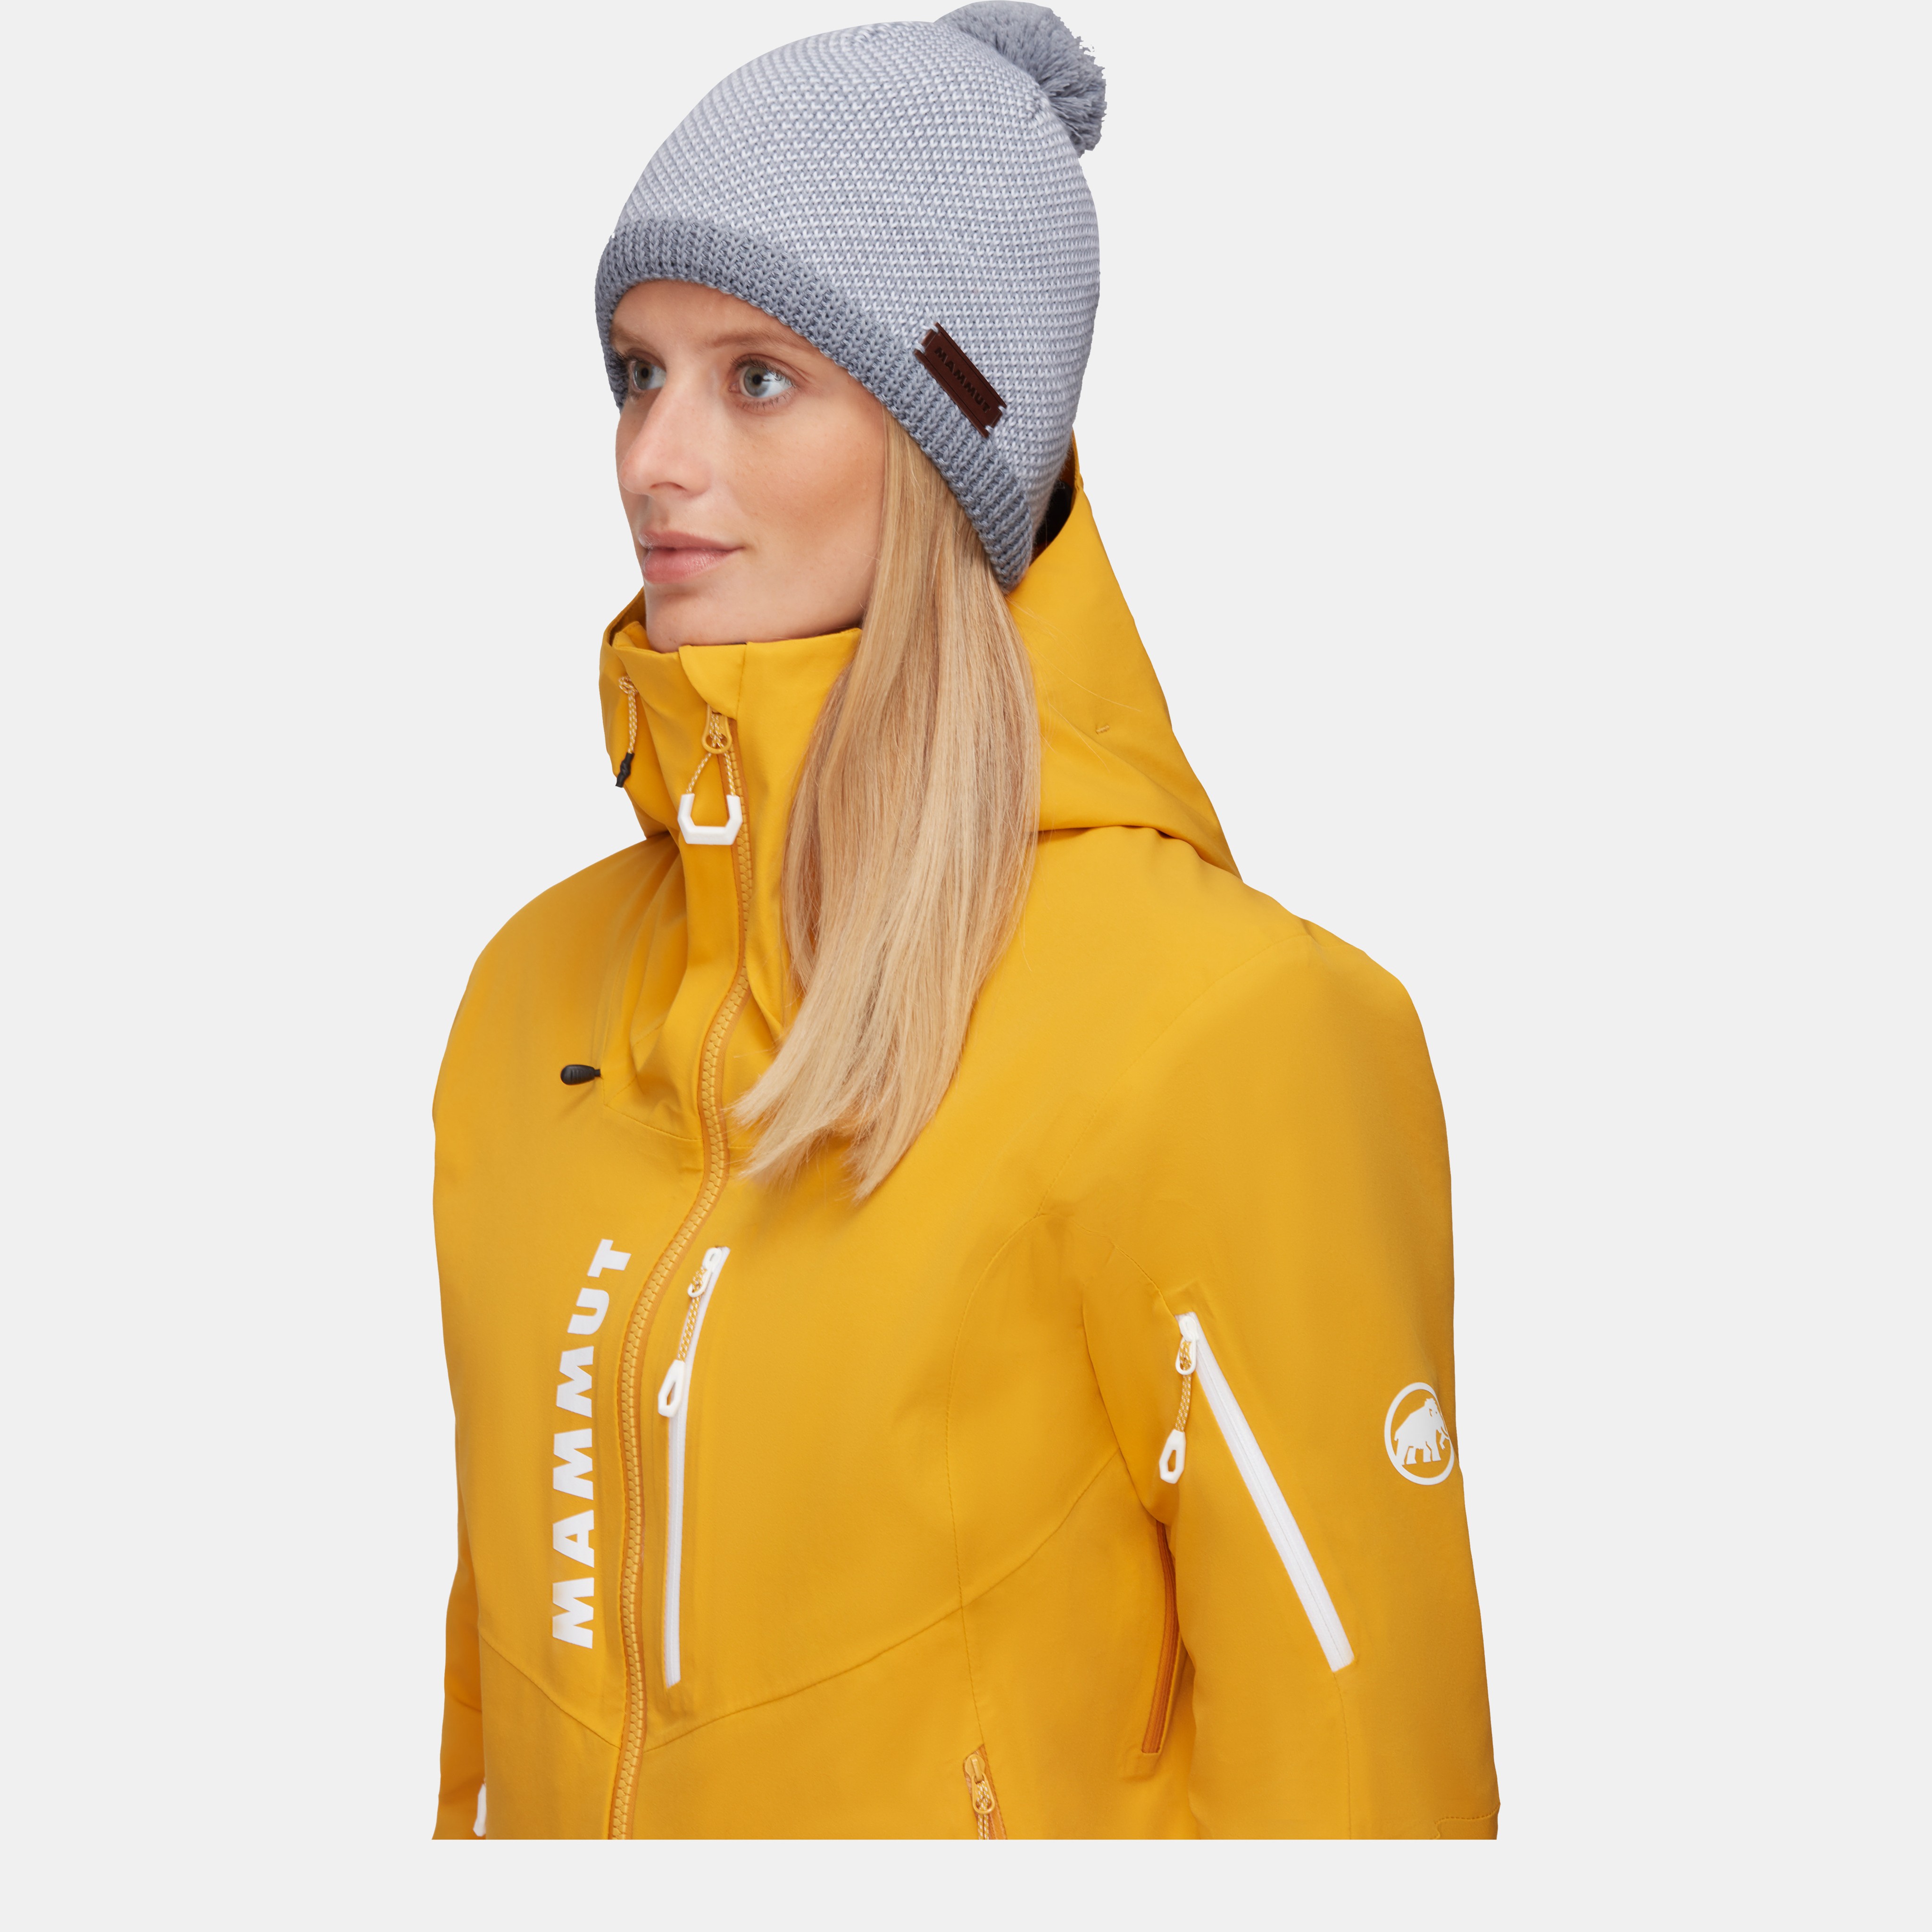 Snow Beanie product image